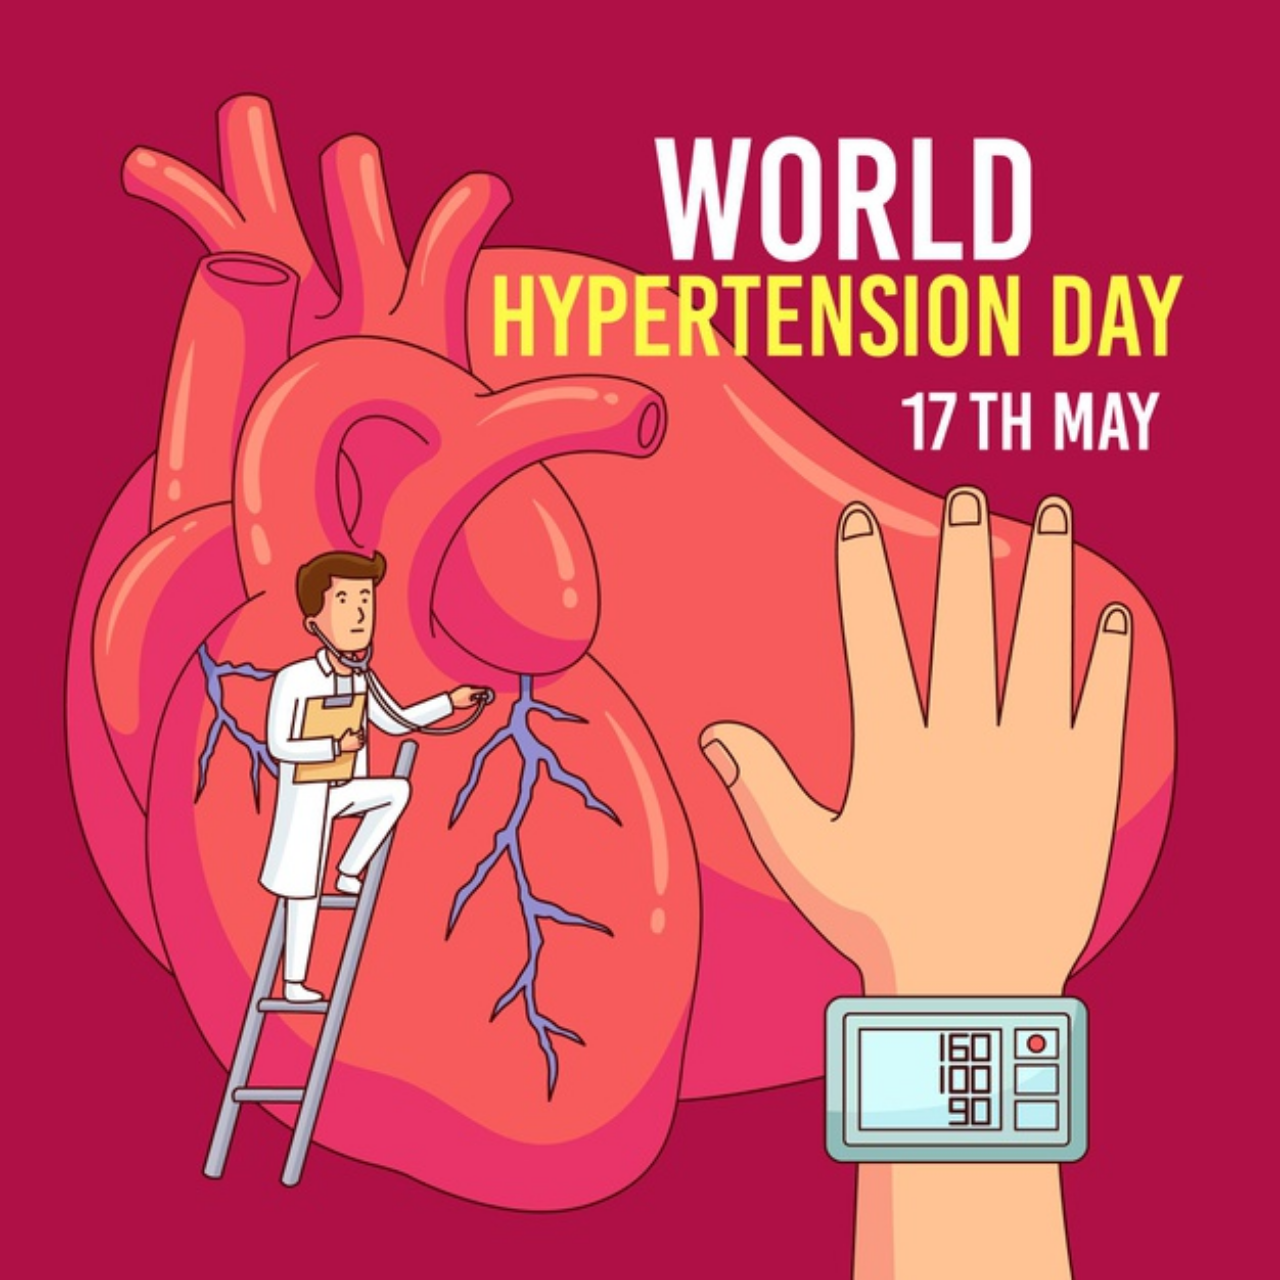 World Hypertension Day 2023: Current Theme, Quotes, Images, Messages, Wishes, Greetings, Posters, Banners, Banners, Cliparts, Captions, and Sayings